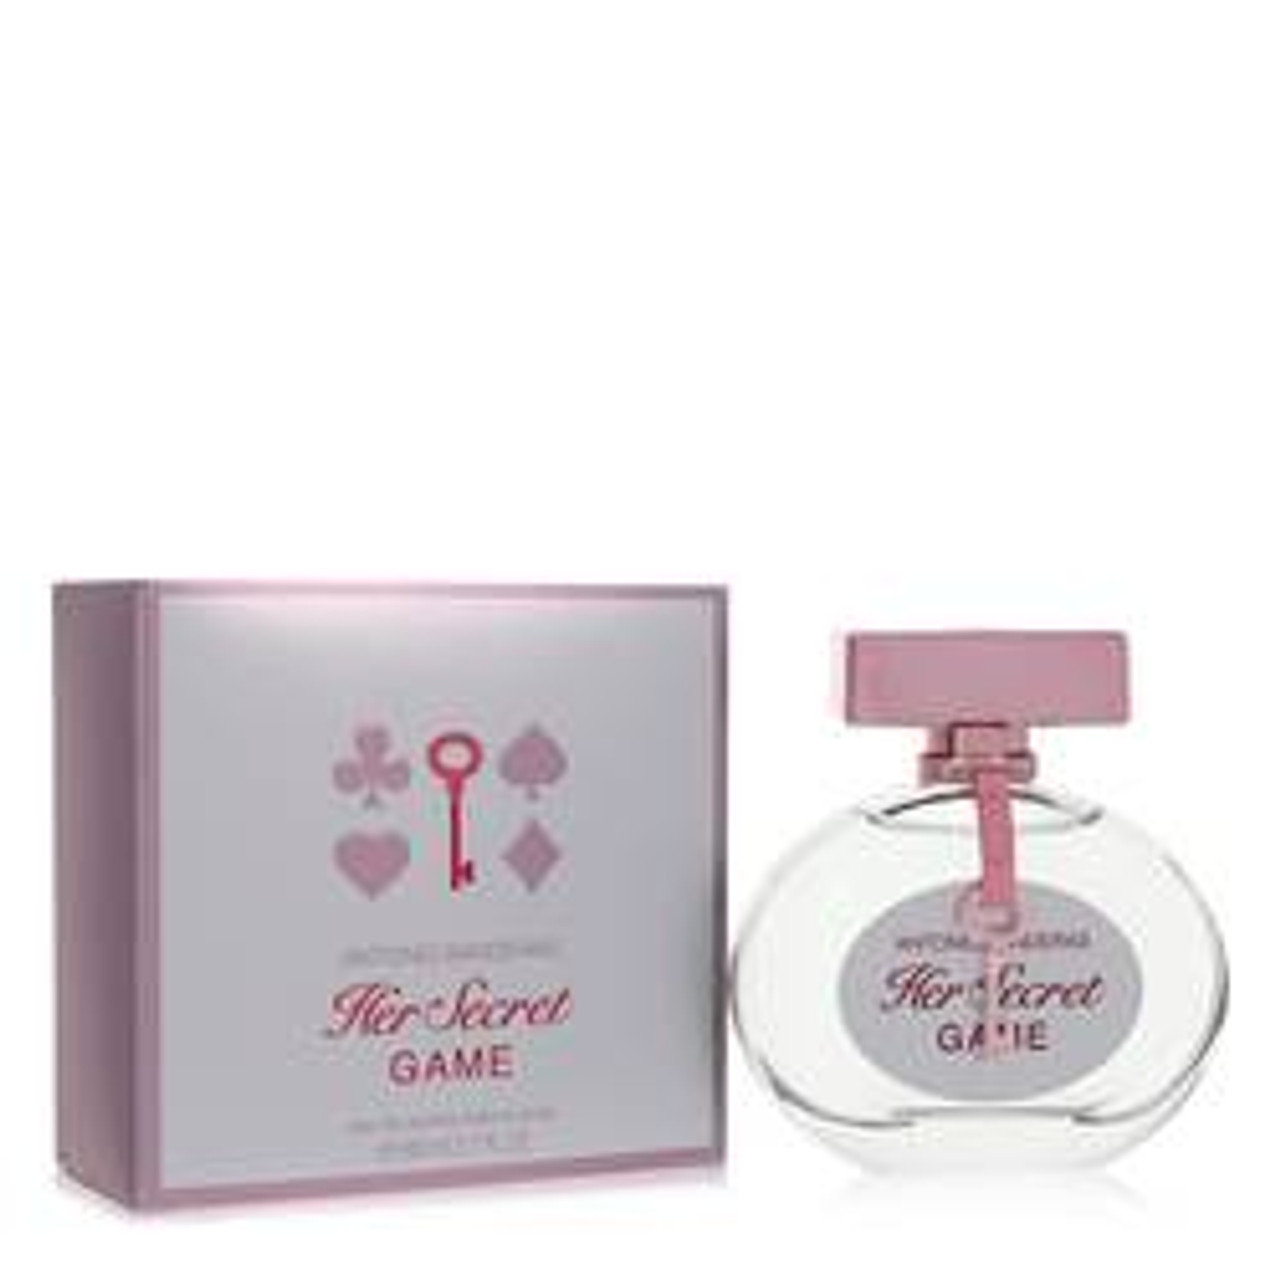 Her Secret Game Perfume By Antonio Banderas Eau De Toilette Spray 2.7 oz for Women - [From 59.00 - Choose pk Qty ] - *Ships from Miami